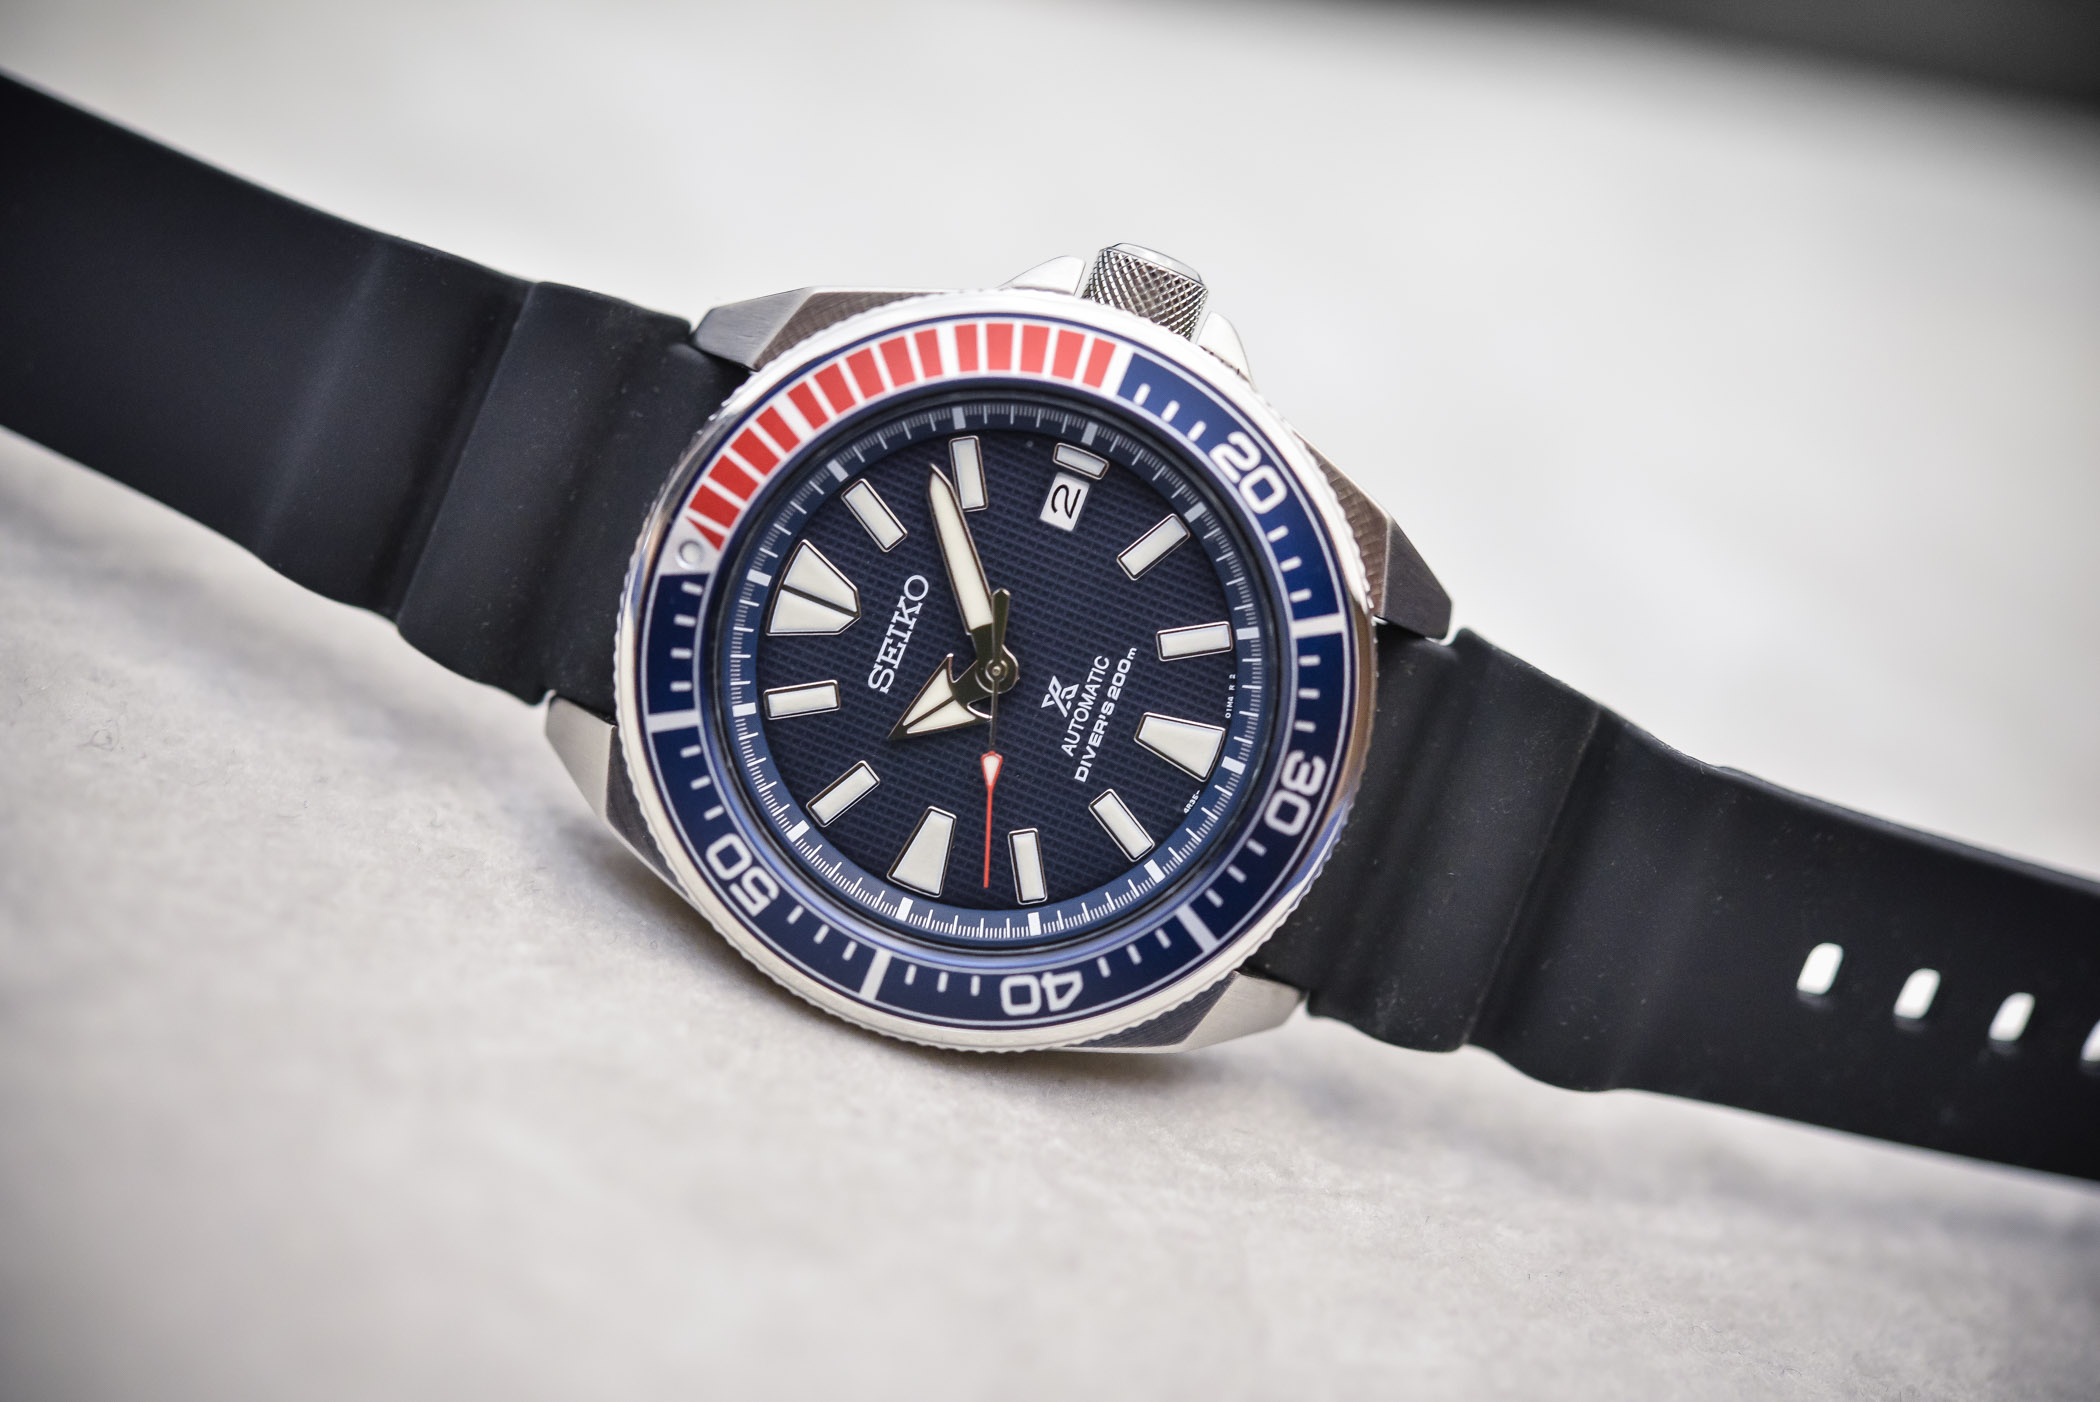 Seiko Samurai vs. Glycine Combat sub: Which would you buy and why? |  WatchUSeek Watch Forums